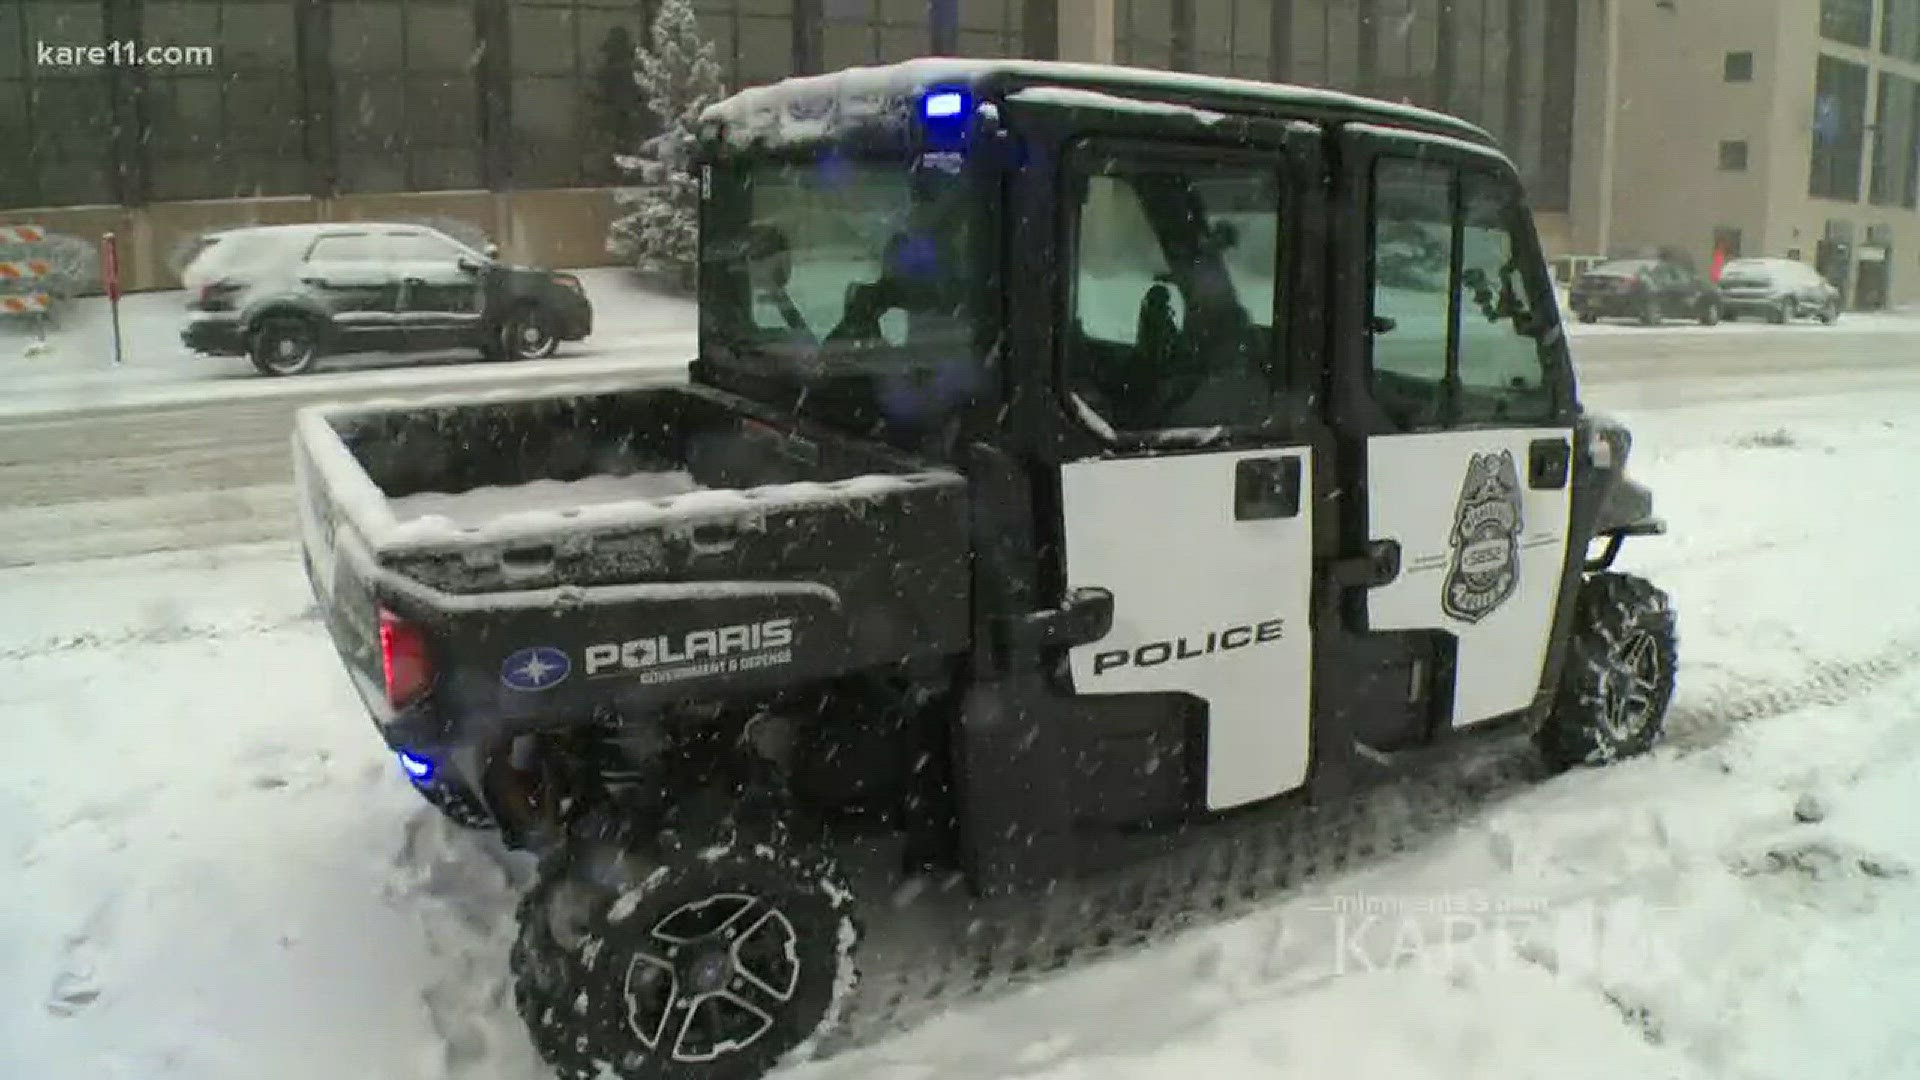 Officers may have an easier time getting around during the Super Bowl thanks to new vehicles Polaris expects to roll out for the big game.